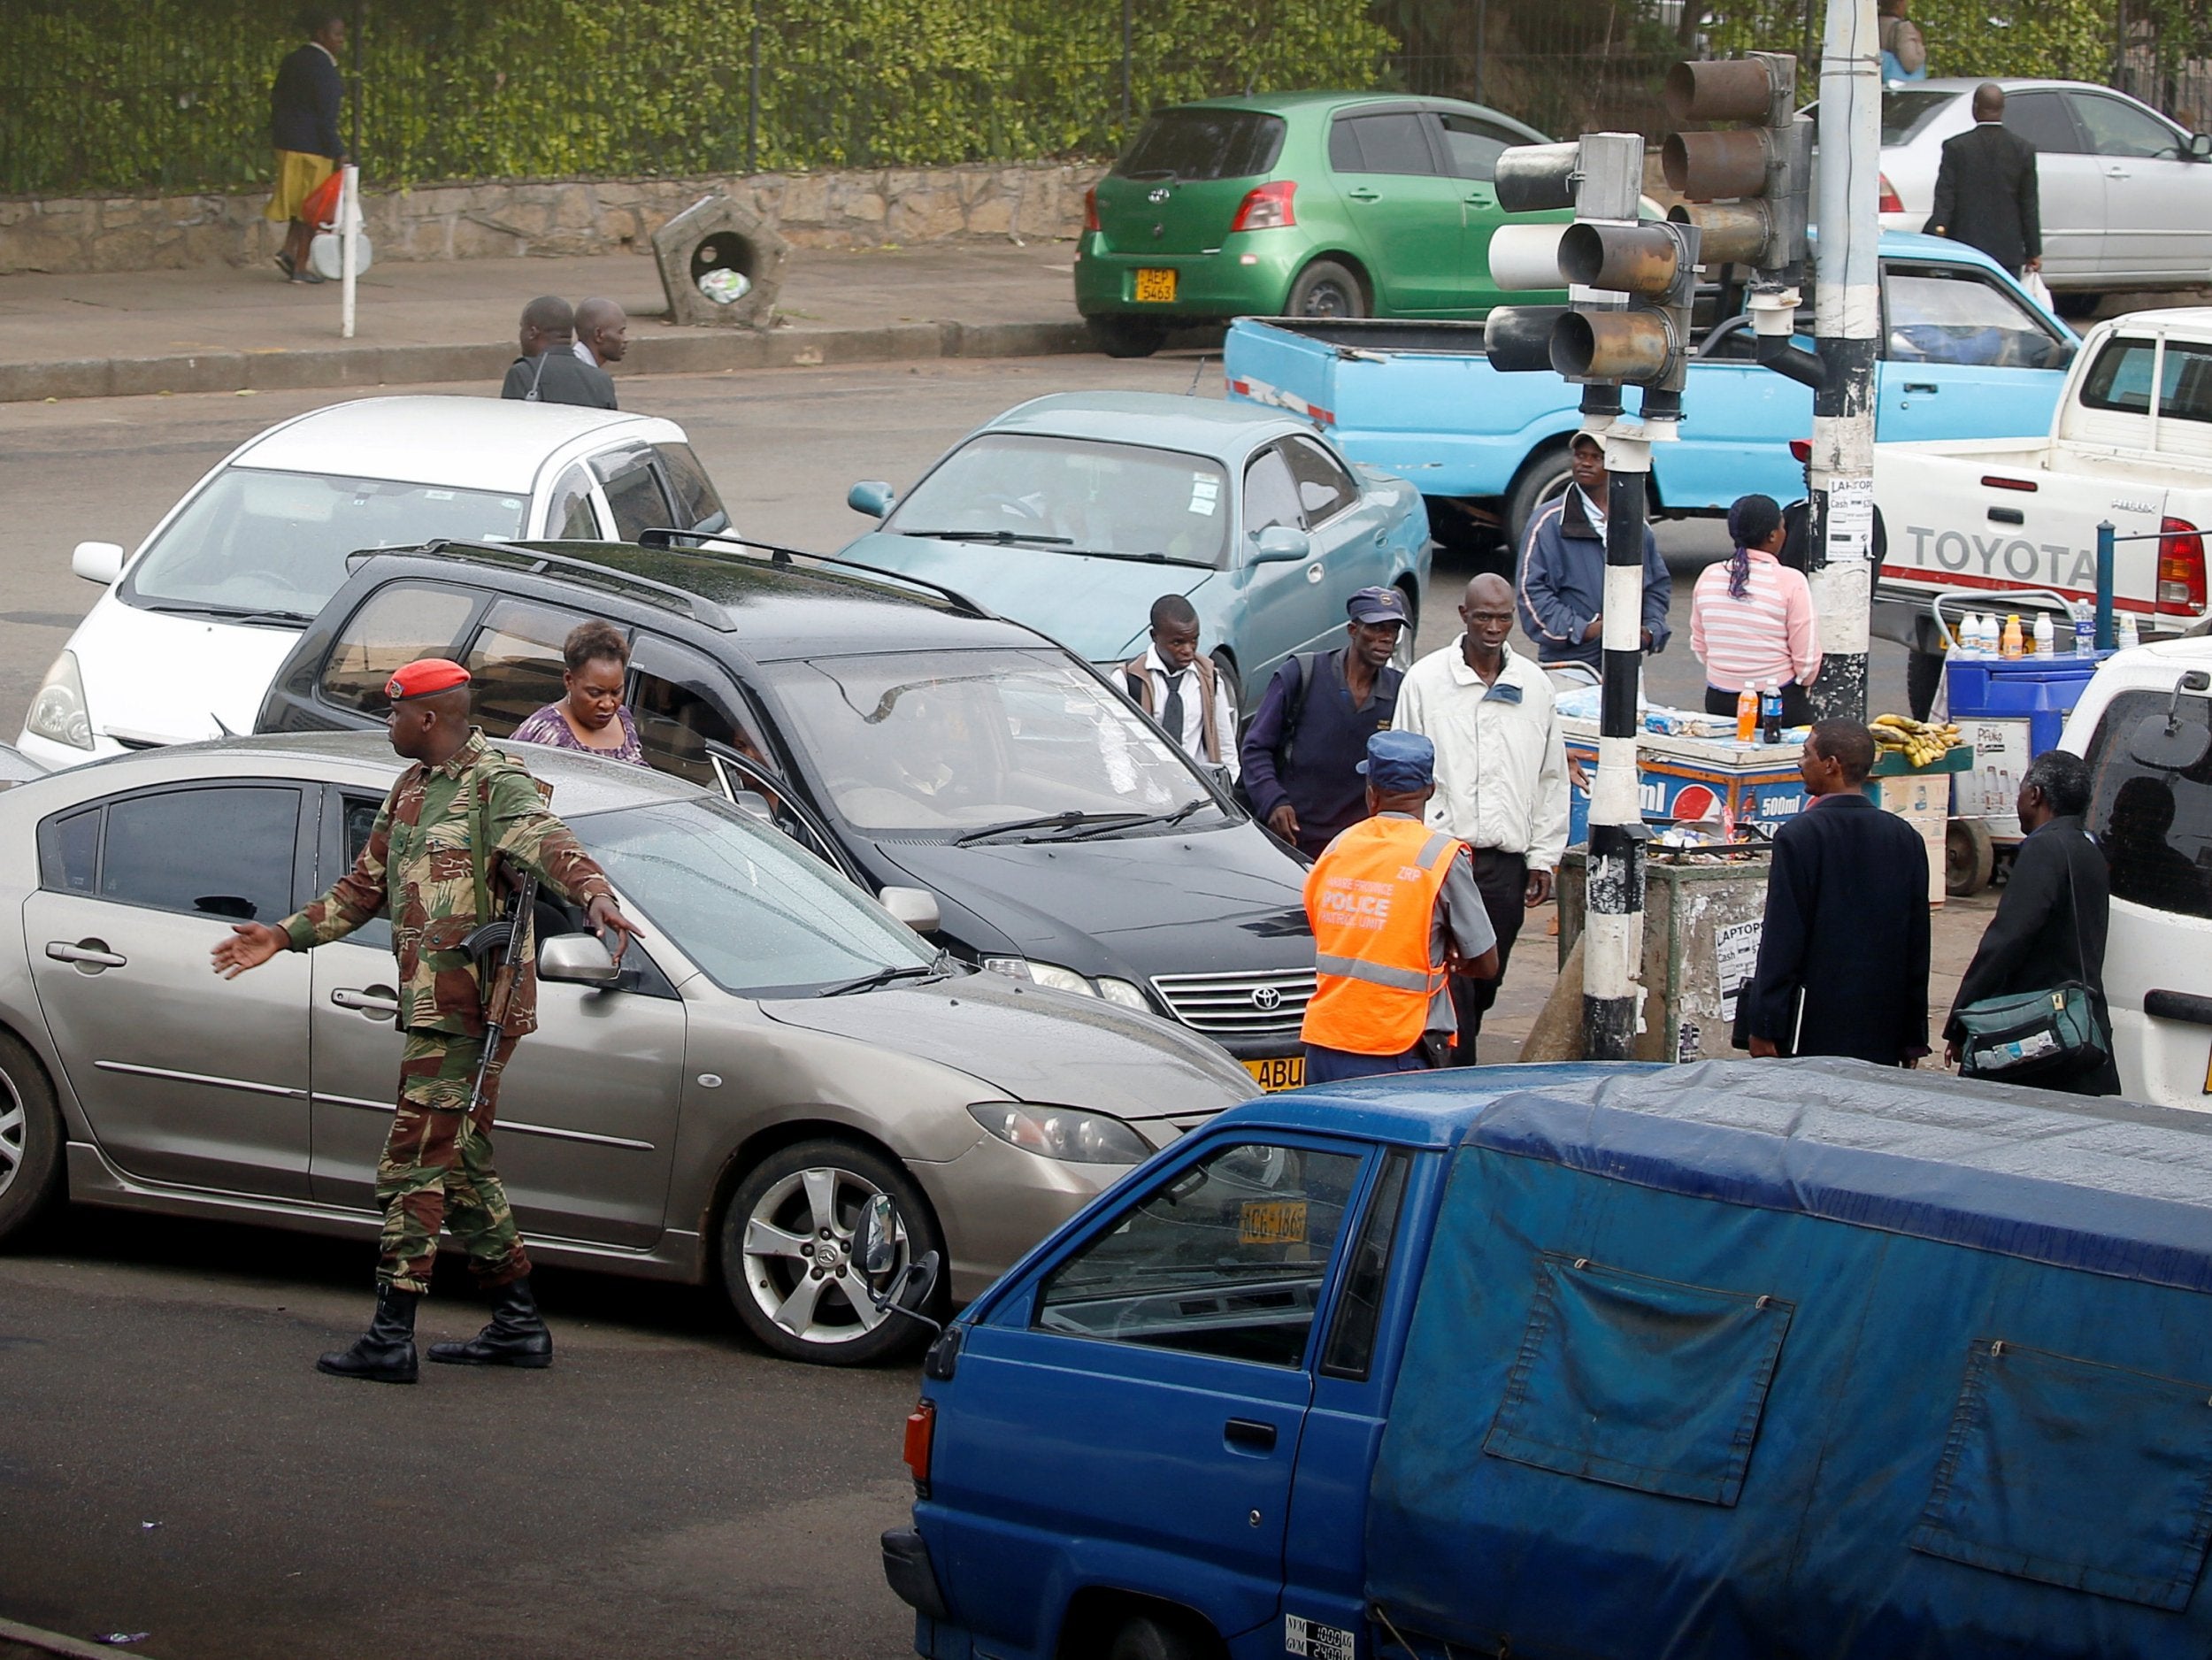 Fuel price hikes have led to unrest in Zimbabwe, including in the capital Harare